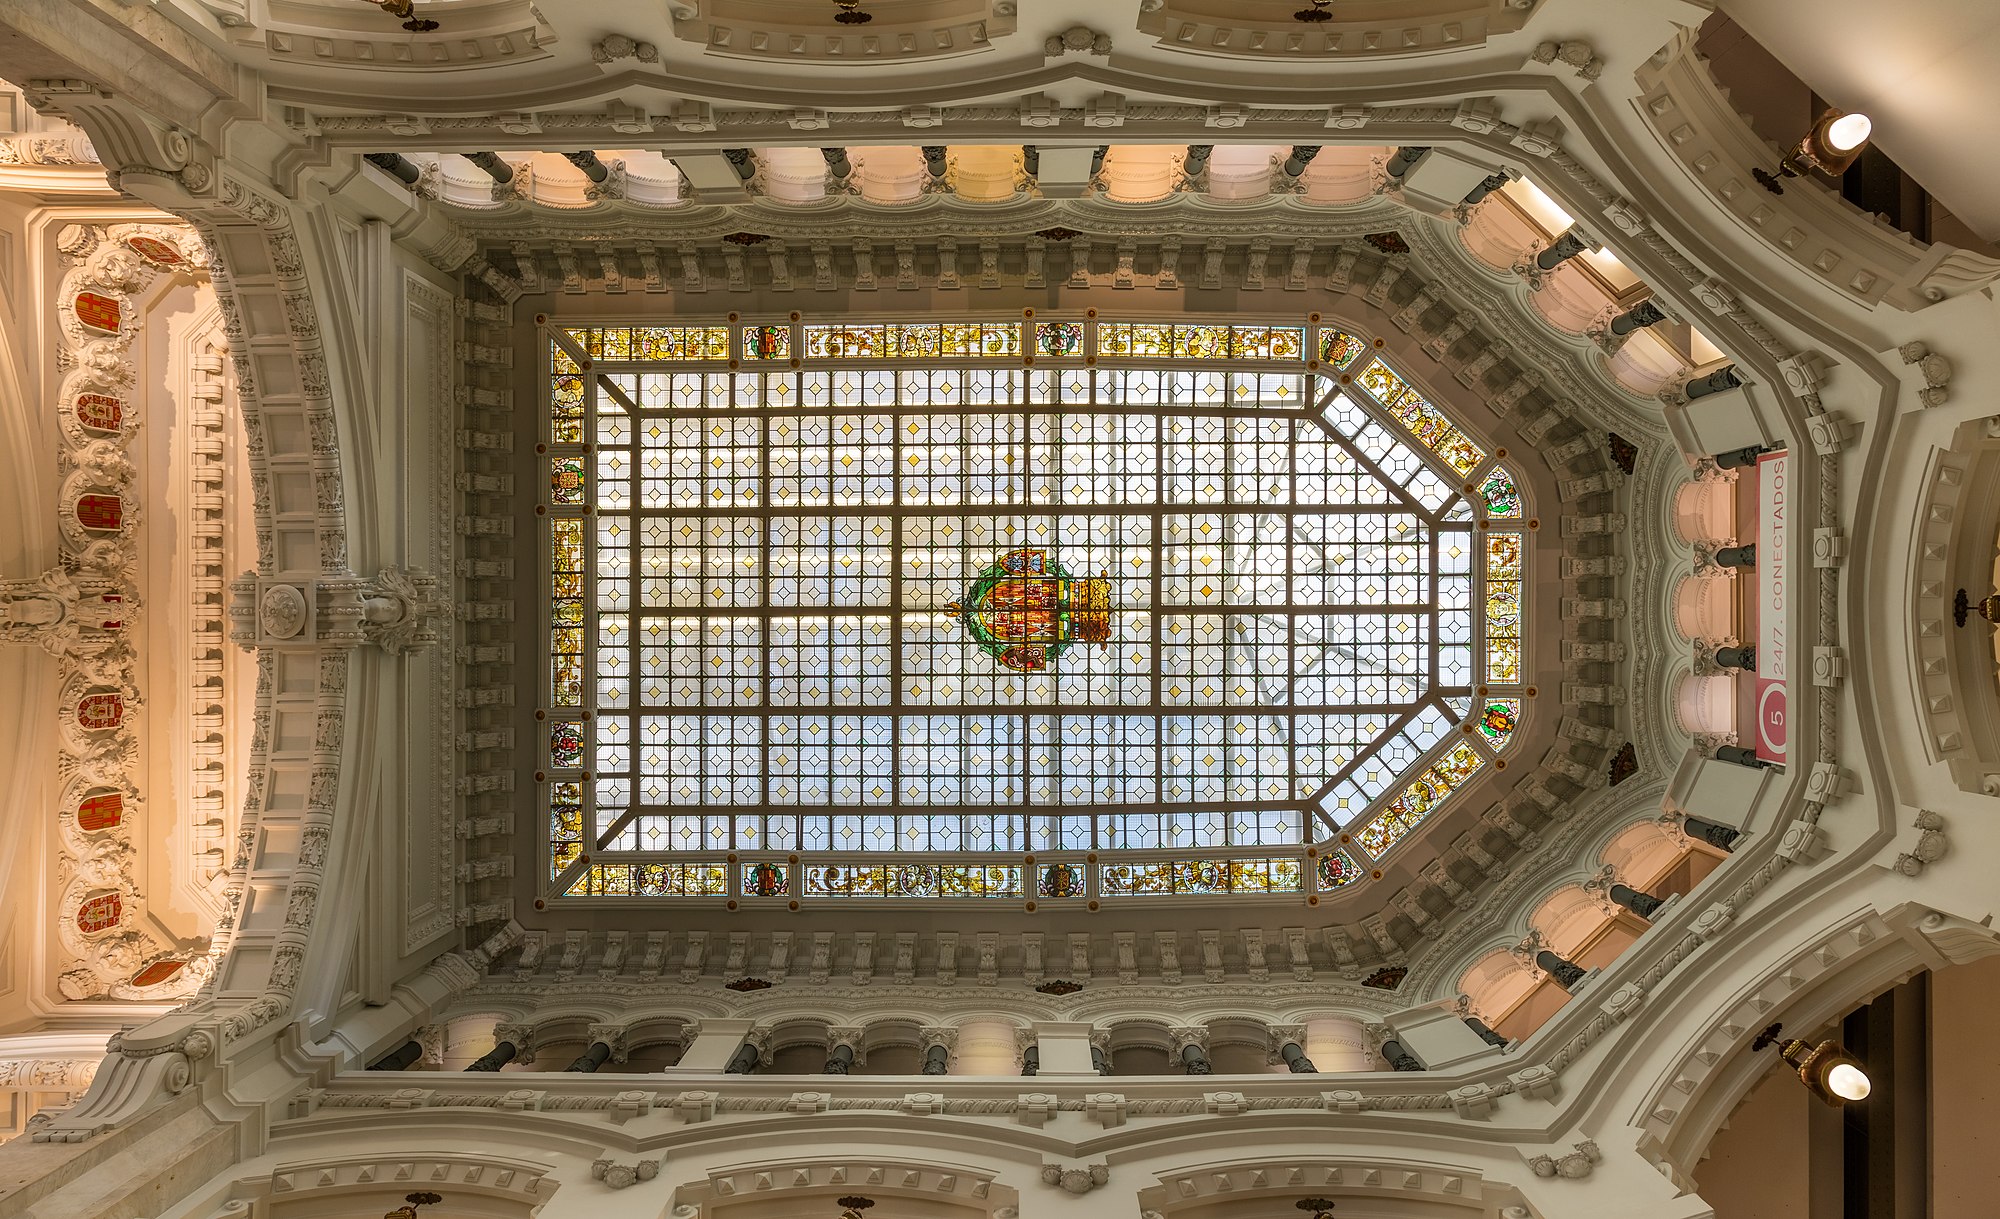 Skylight in the Cybele Palace or Palace of Communication, located on the Plaza de Cibeles, Madrid, Spain. The building, one of the landmarks of Spain's capital, was inaugurated in 1919 as headquarters of the Spanish postal and telecommunications service (Correos). The building was designed by Antonio Palacios and Joaquín Otamendi. Today the building is seat of the City Council.